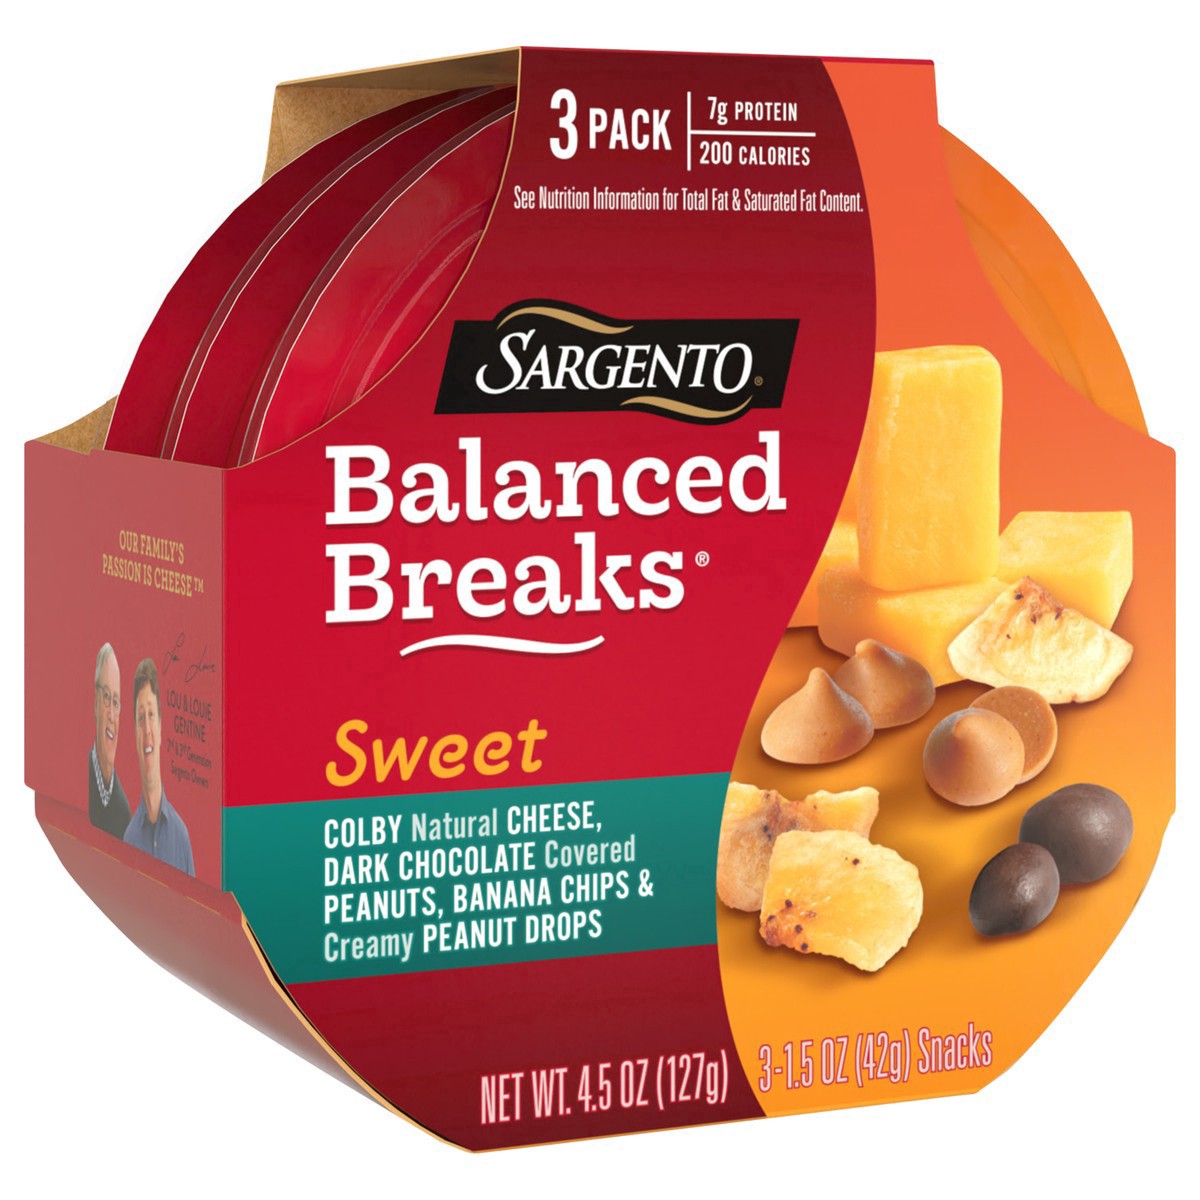 slide 11 of 17, Sargento Sweet Balanced Breaks with Colby Natural Cheese, Dark Chocolate Covered Peanuts, Banana Chips and Creamy Peanut Drops, 1.5 oz., 3-Pack, 4.5 oz